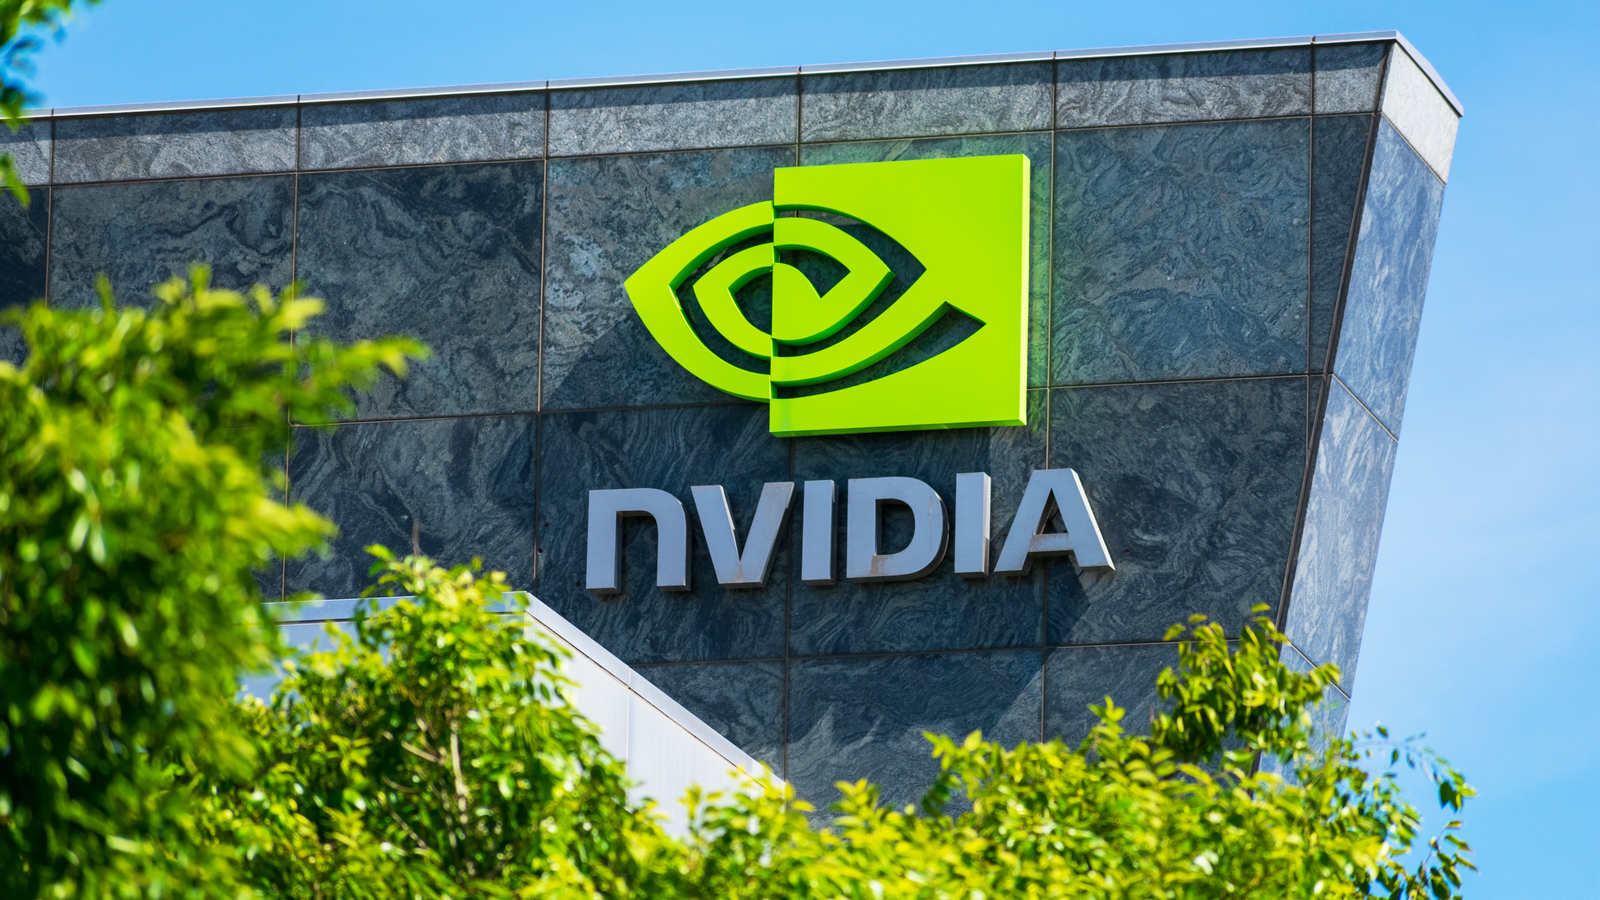 Nvidia (NVDA) logo and sign on headquarters. Blurred foreground with green trees